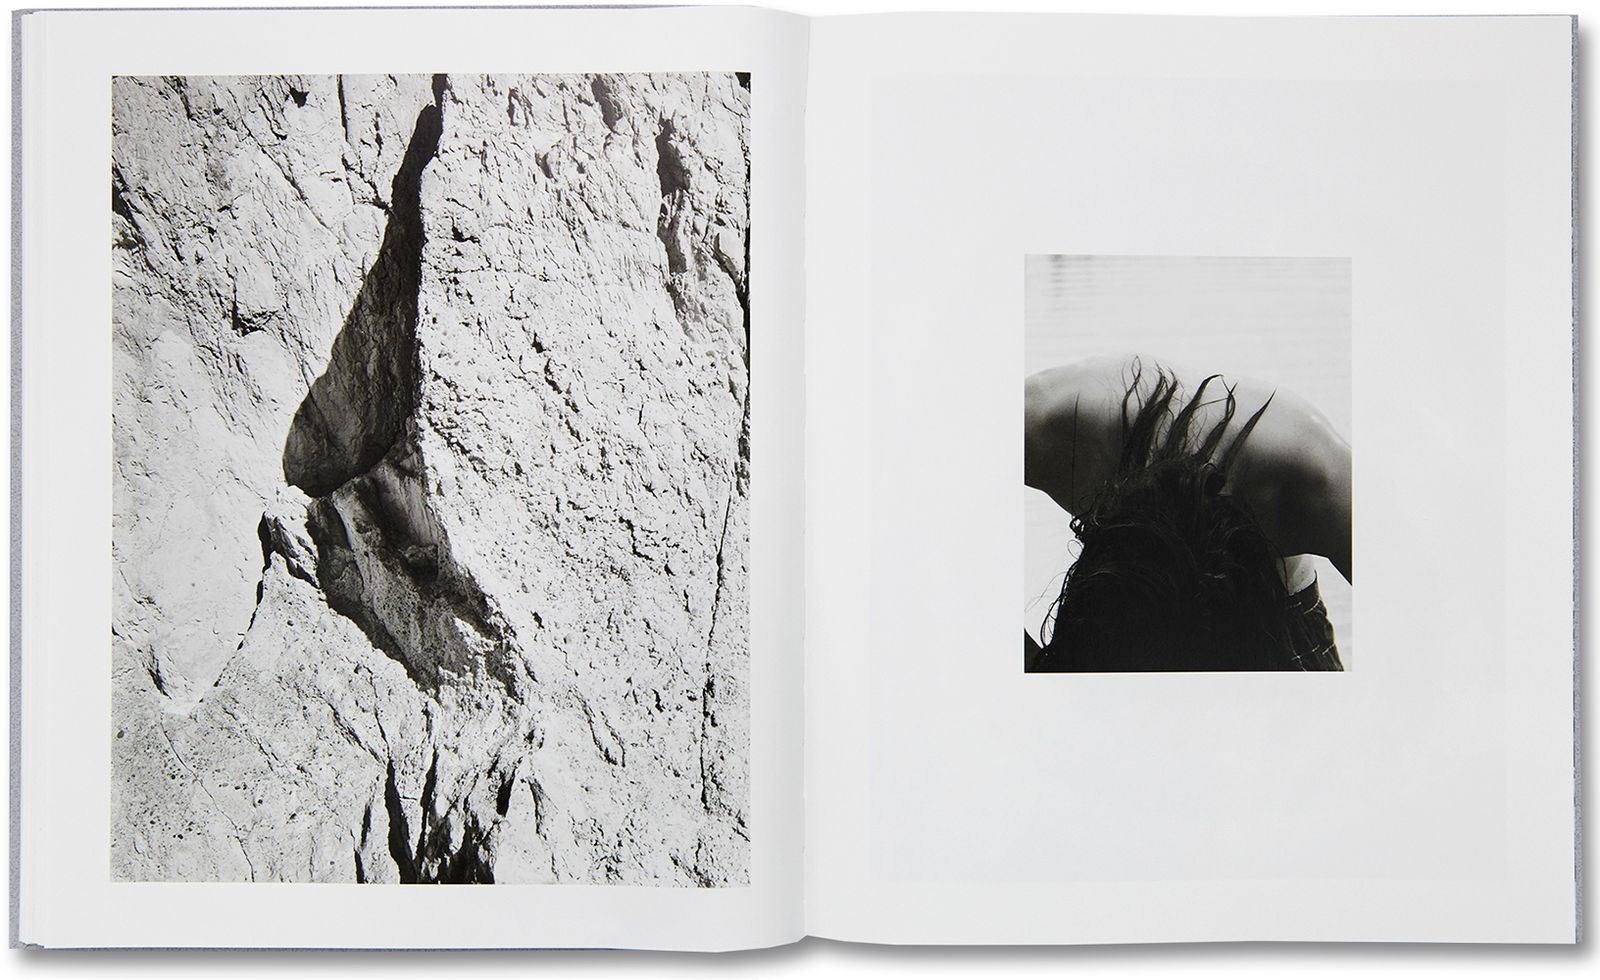 © Sam Contis, spread from the book, Deep Springs